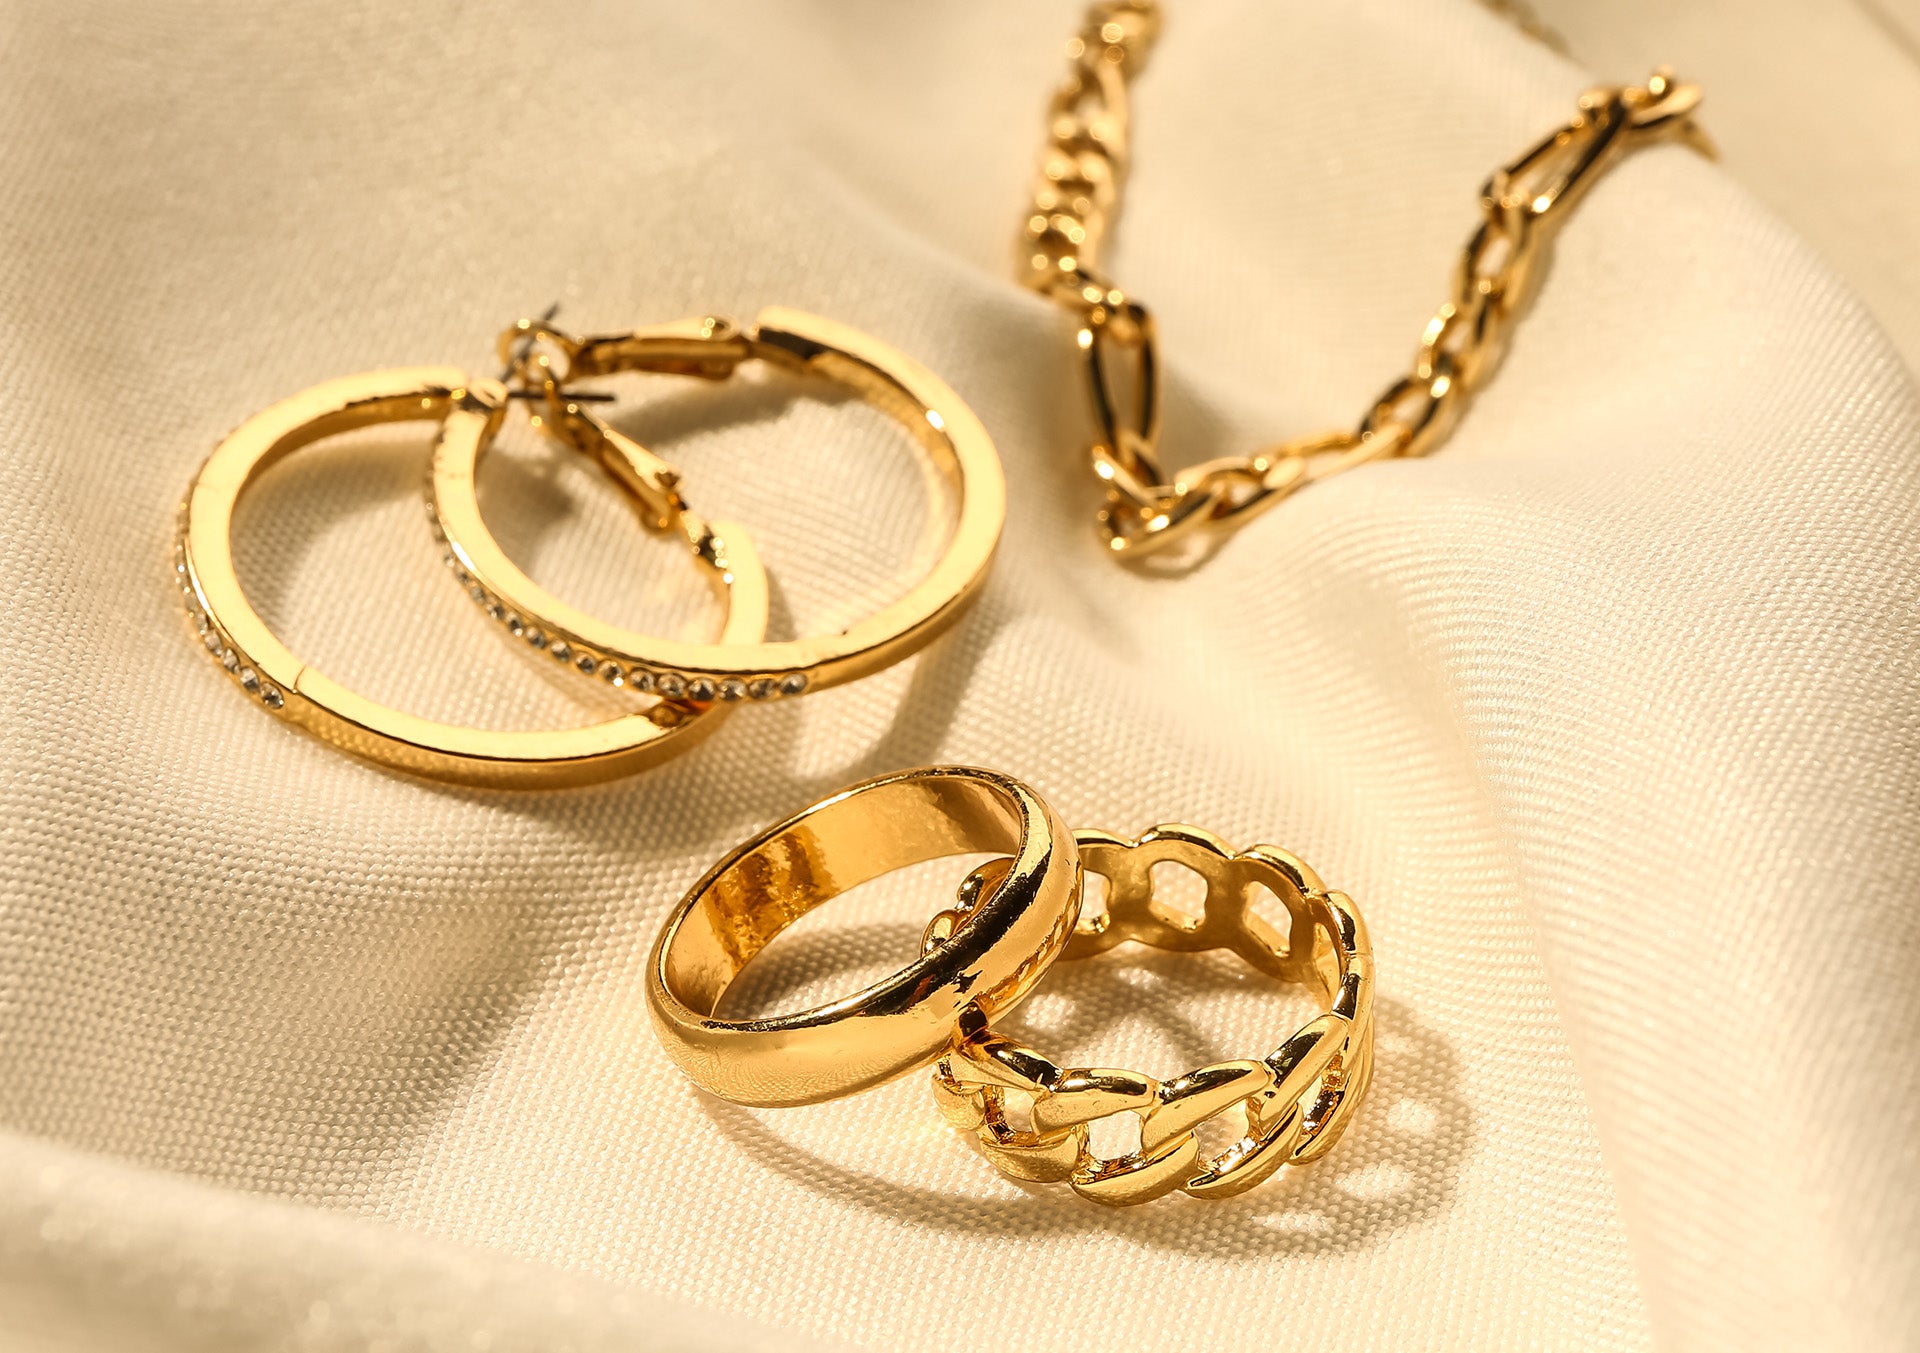 Gold Rings, Earrings, and a Necklace